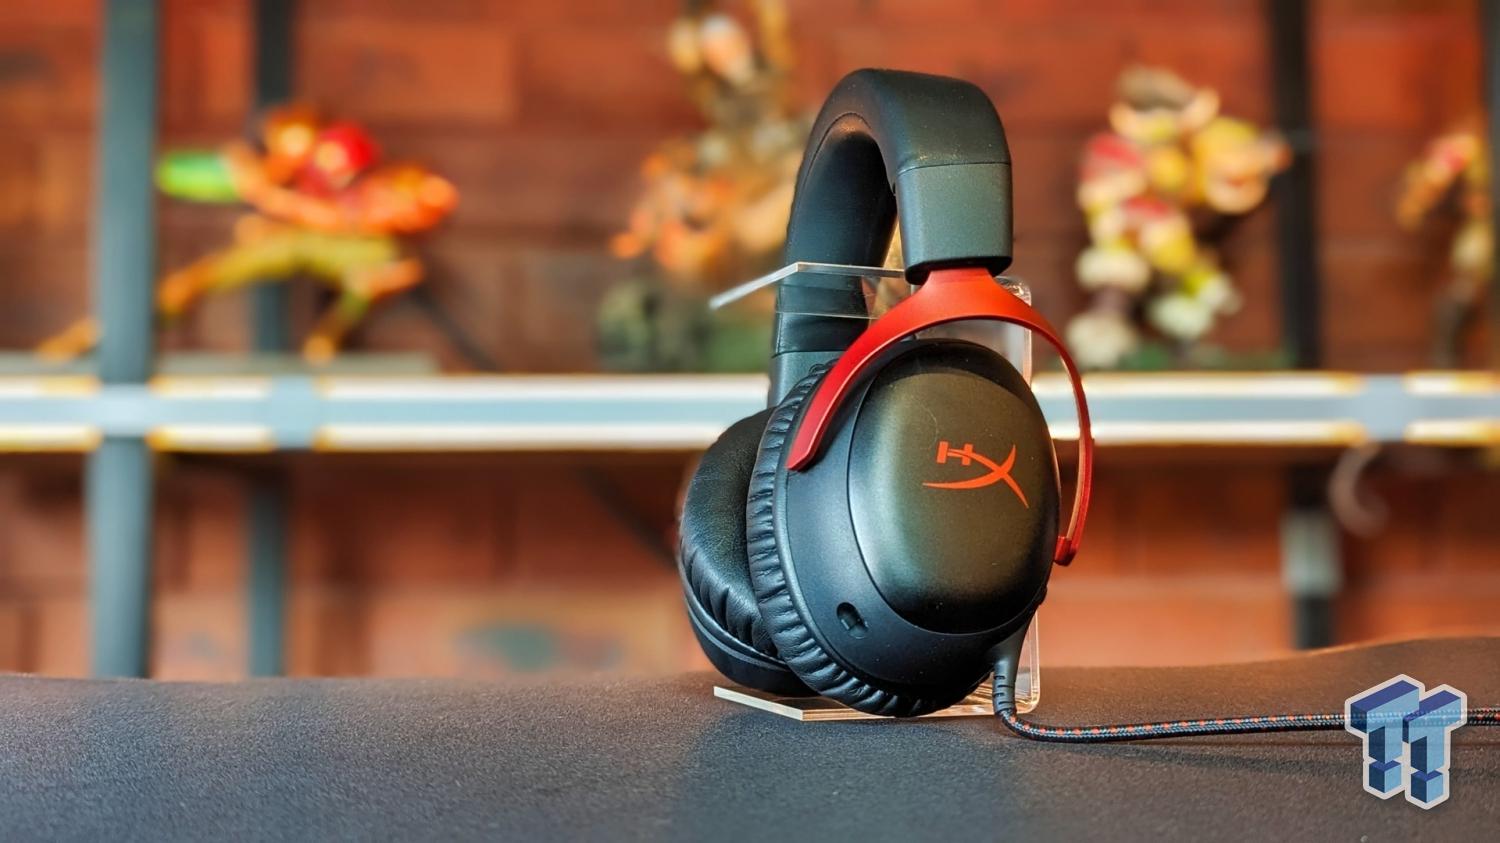 Review: HyperX Cloud III -- Is this the most comfortable gaming